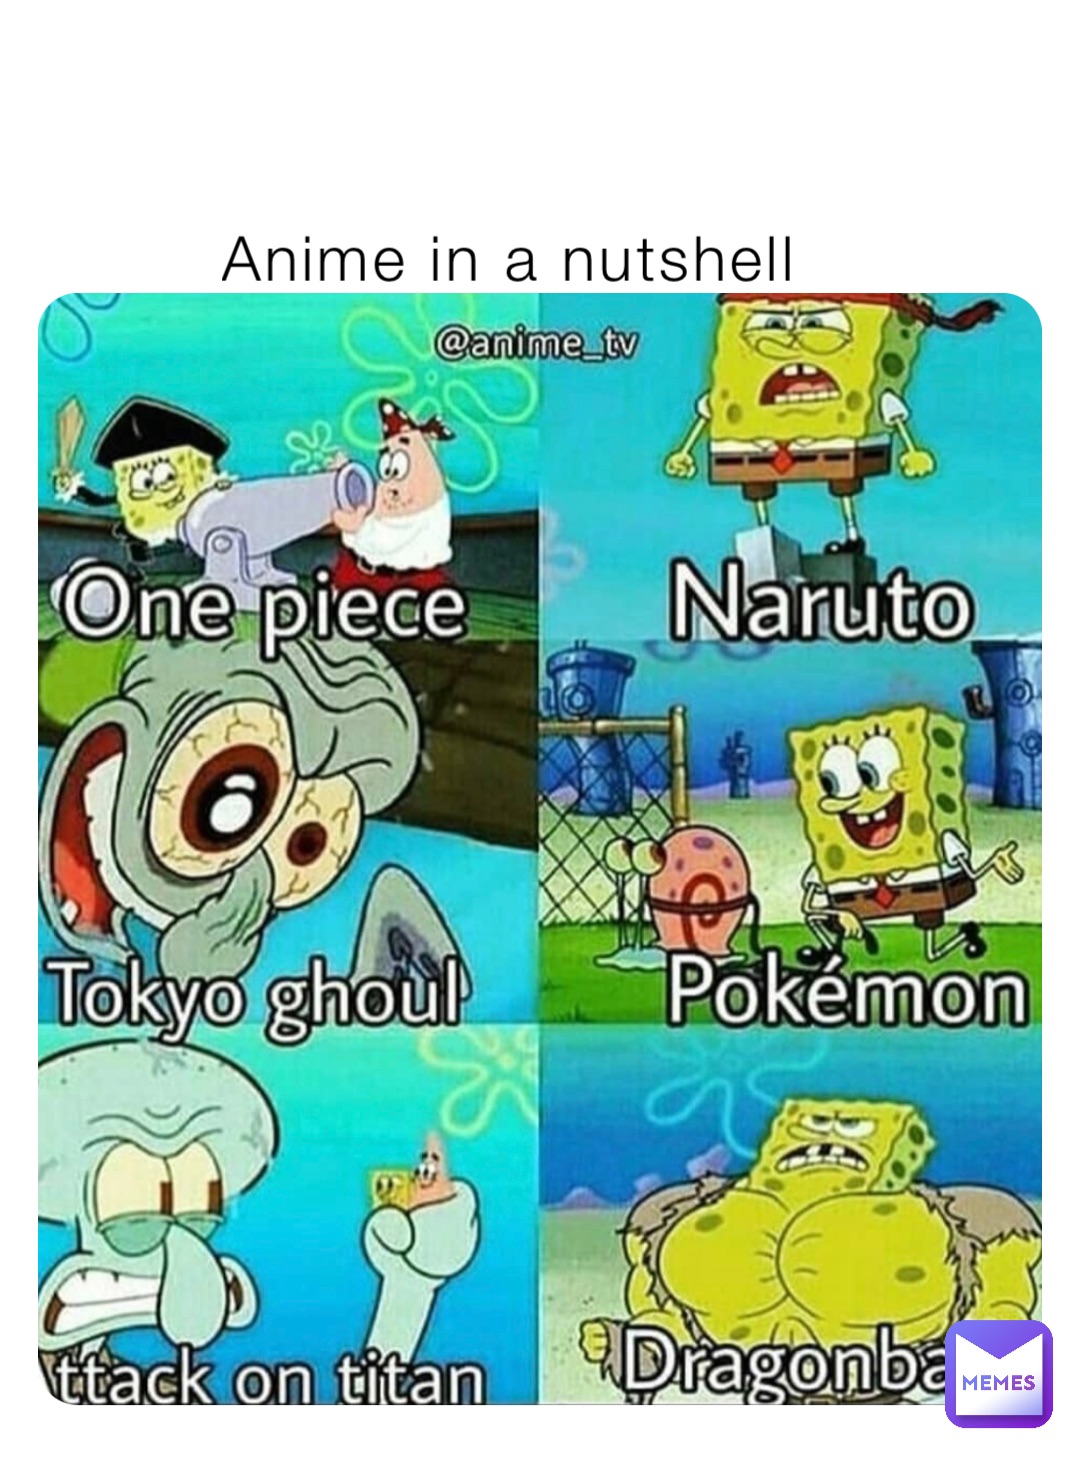 Anime in a nutshell